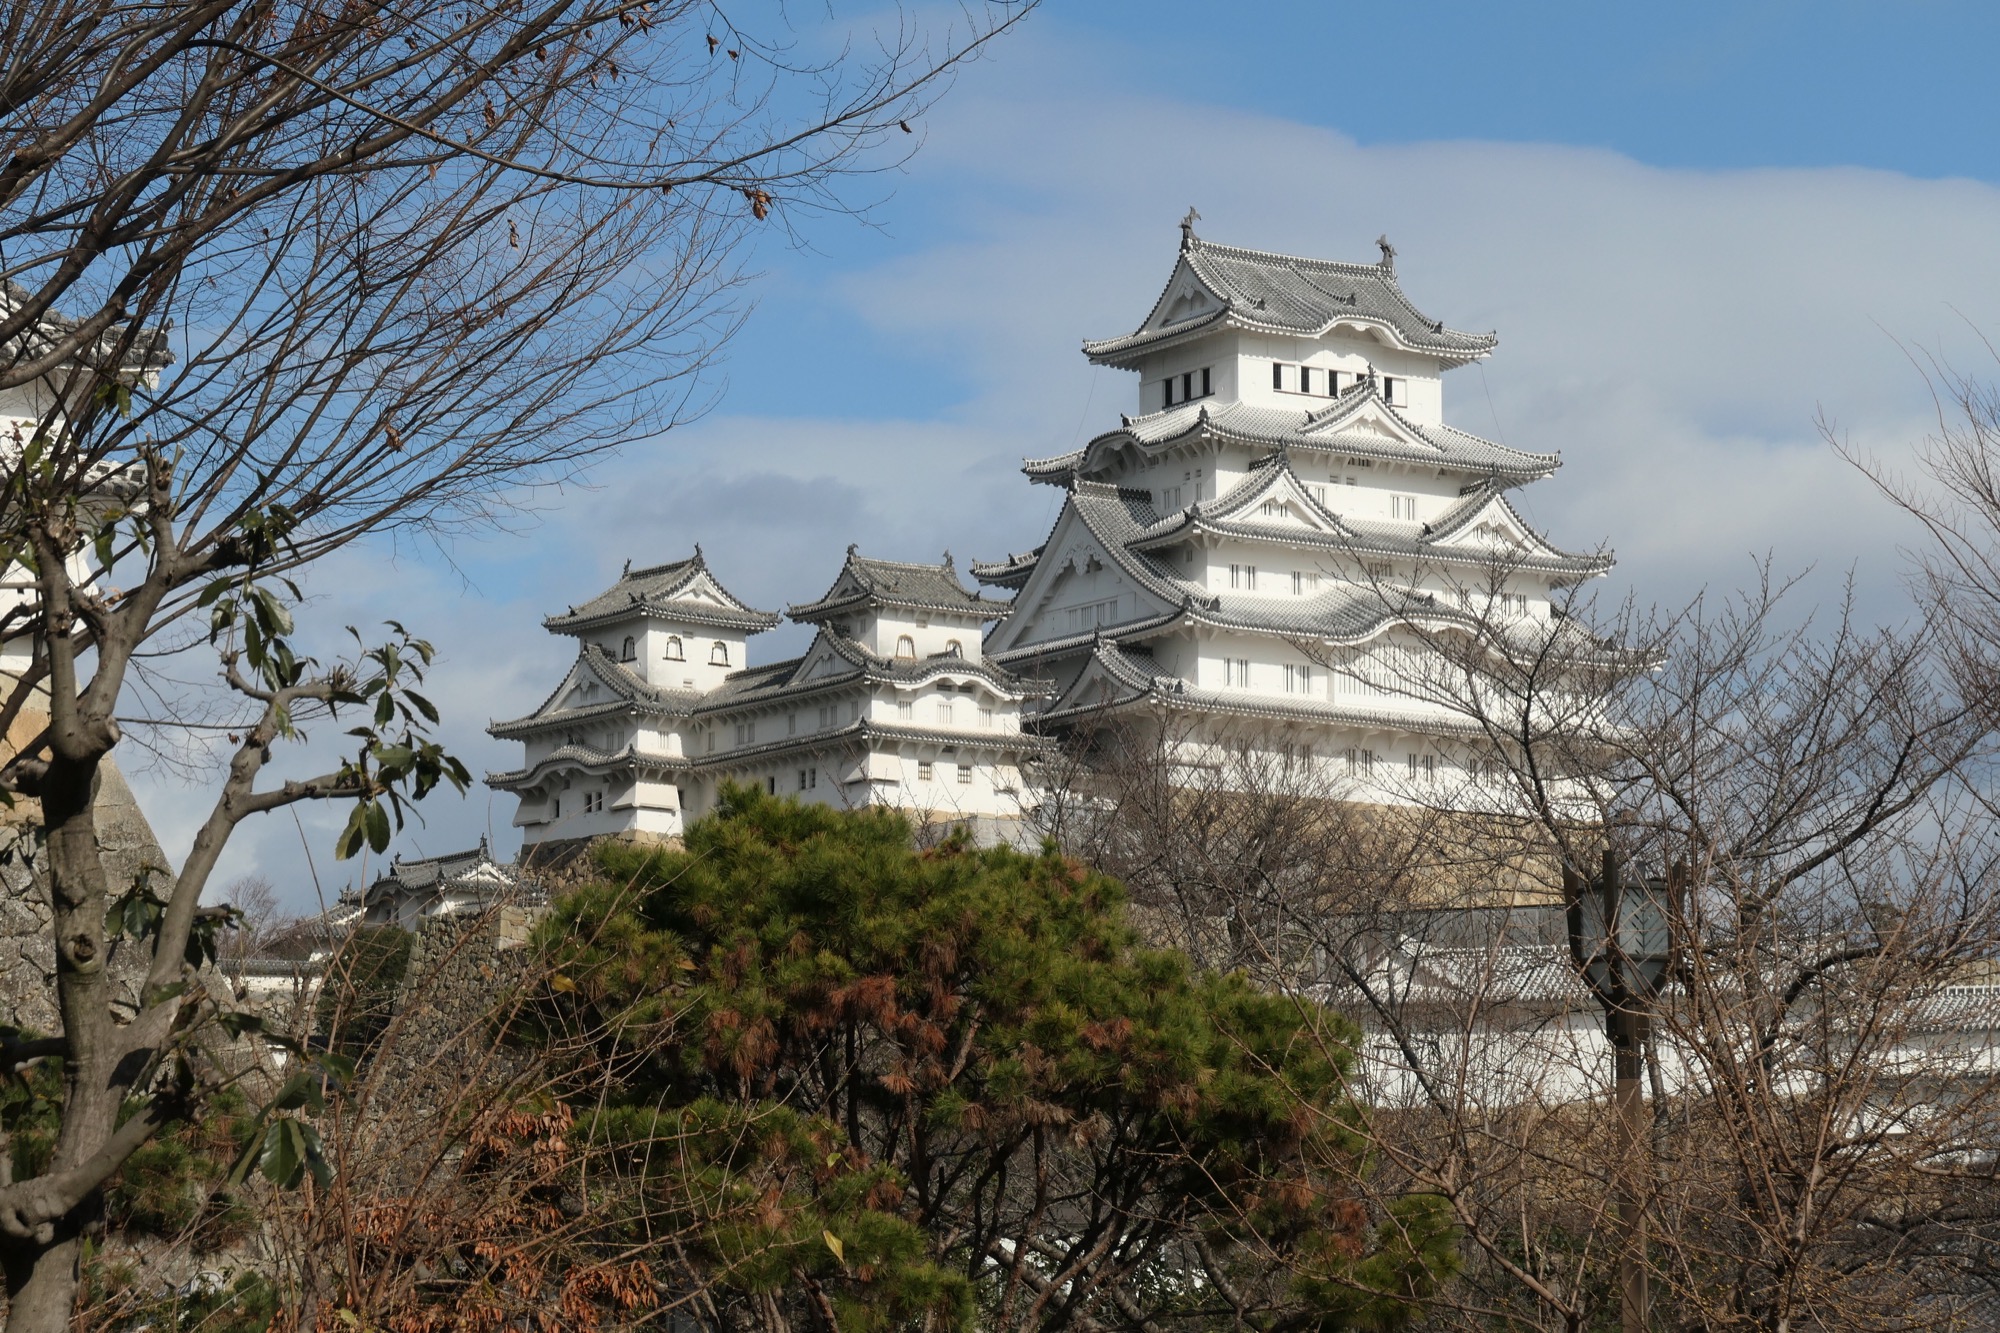 Himeji Castle from a distance